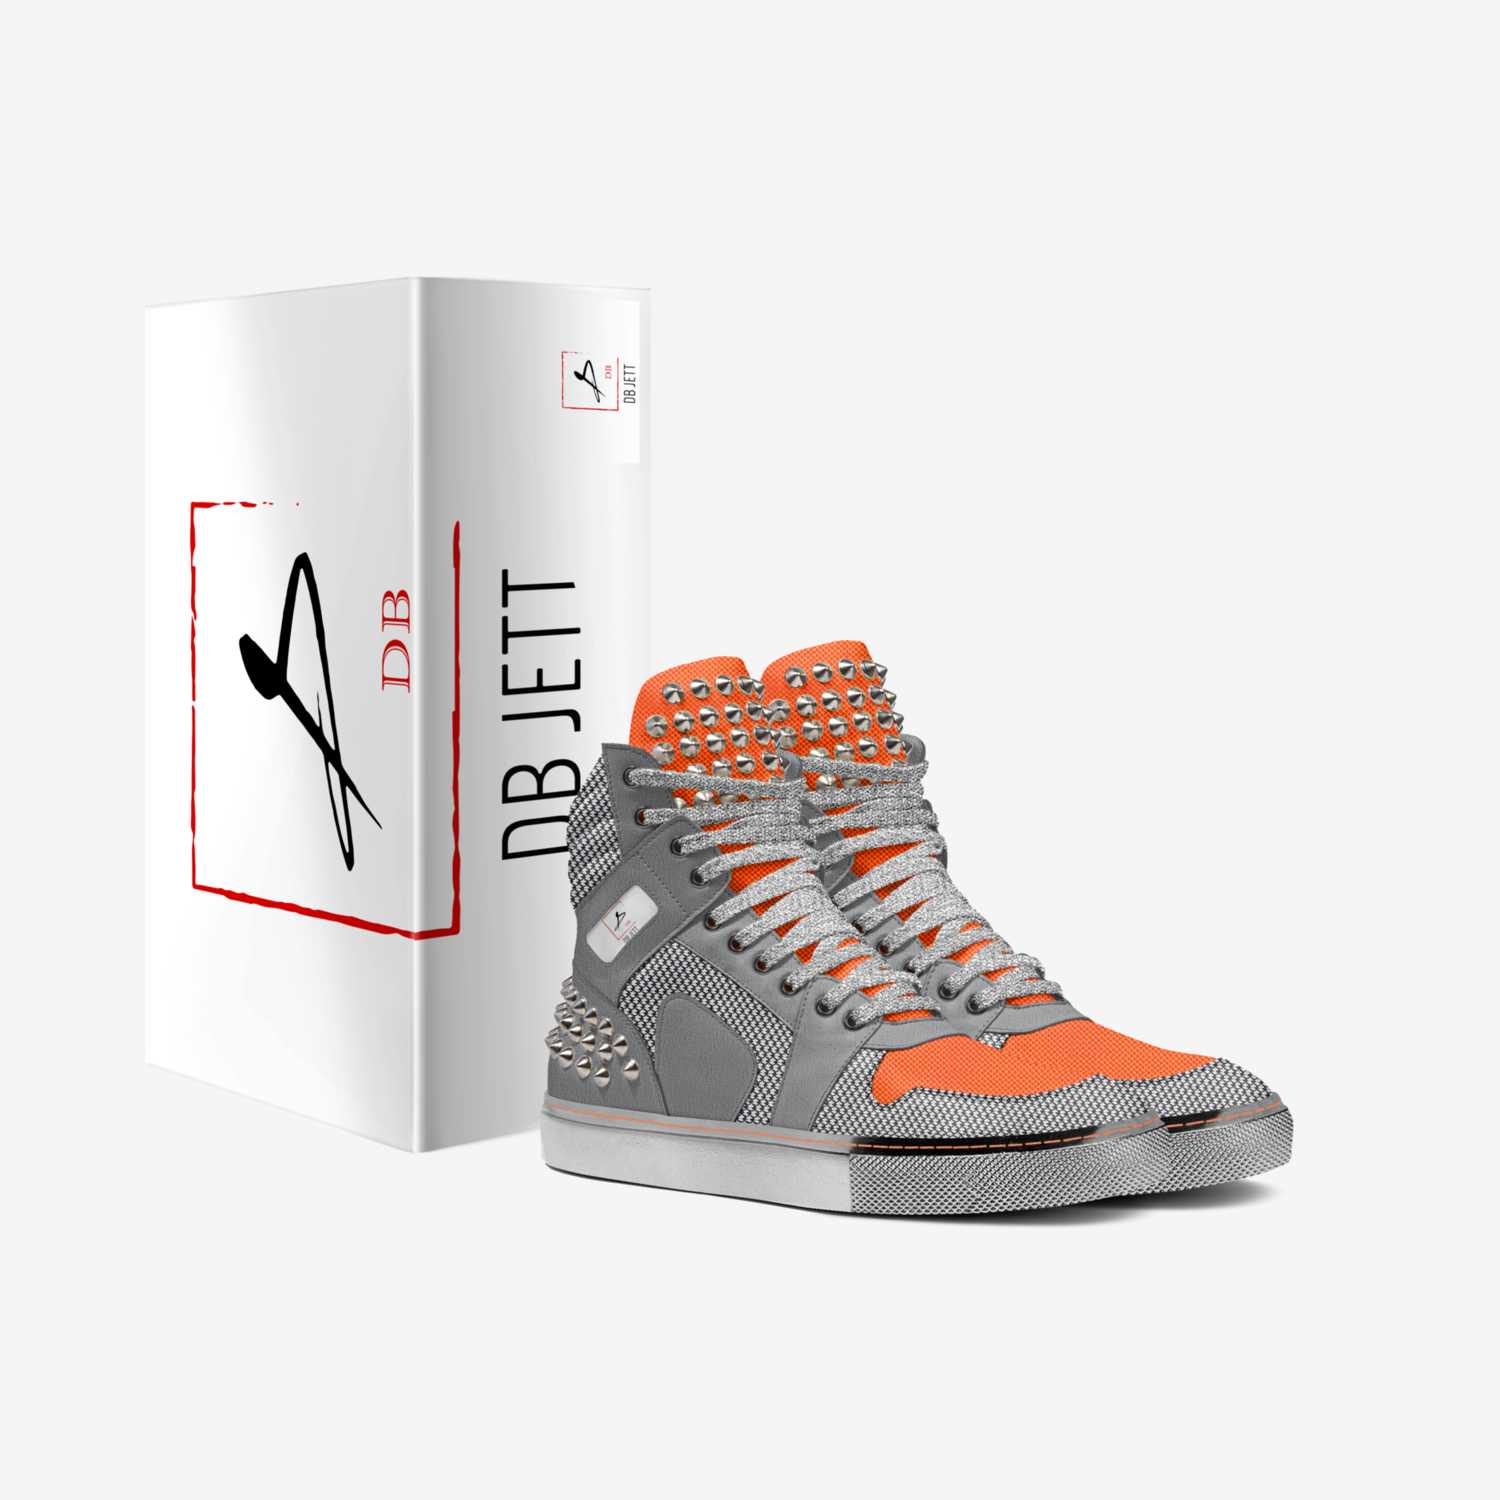 BLAZT custom made in Italy shoes by Bridget Harness | Box view